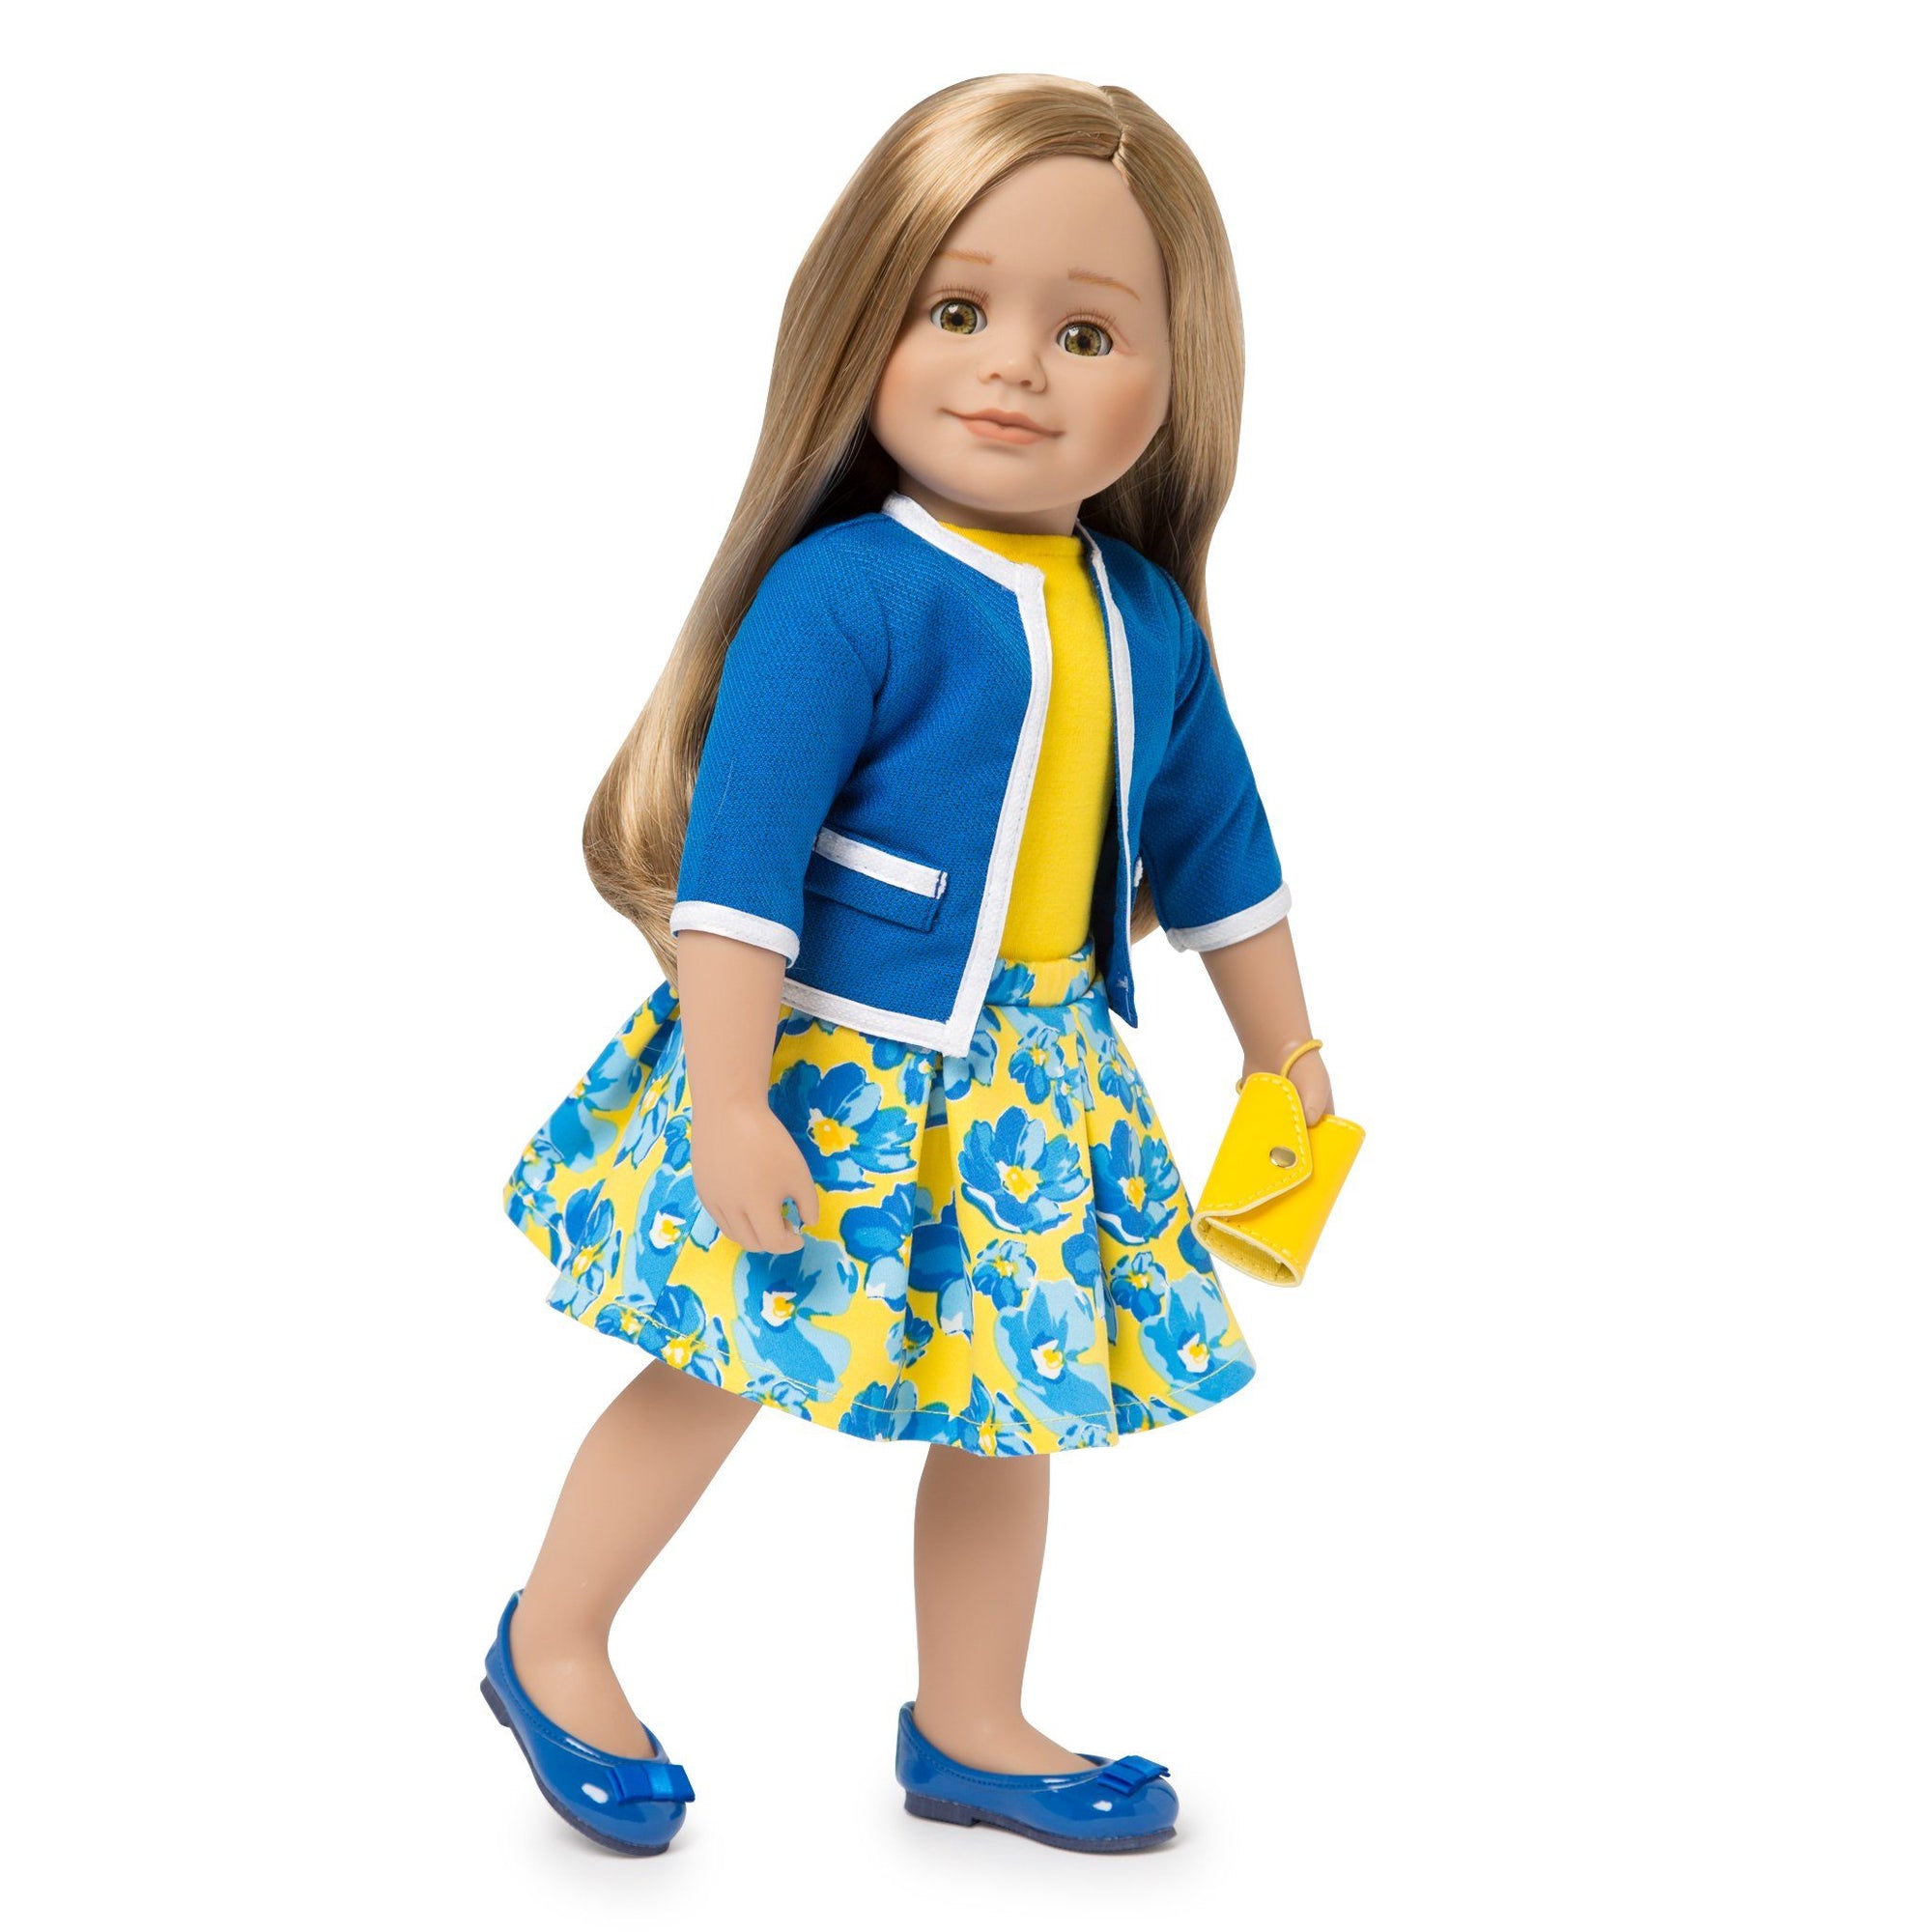 Blue jacket, yellow top, blue and yellow floral skirt, yellow wristlet, blue flats for 18 inch dolls